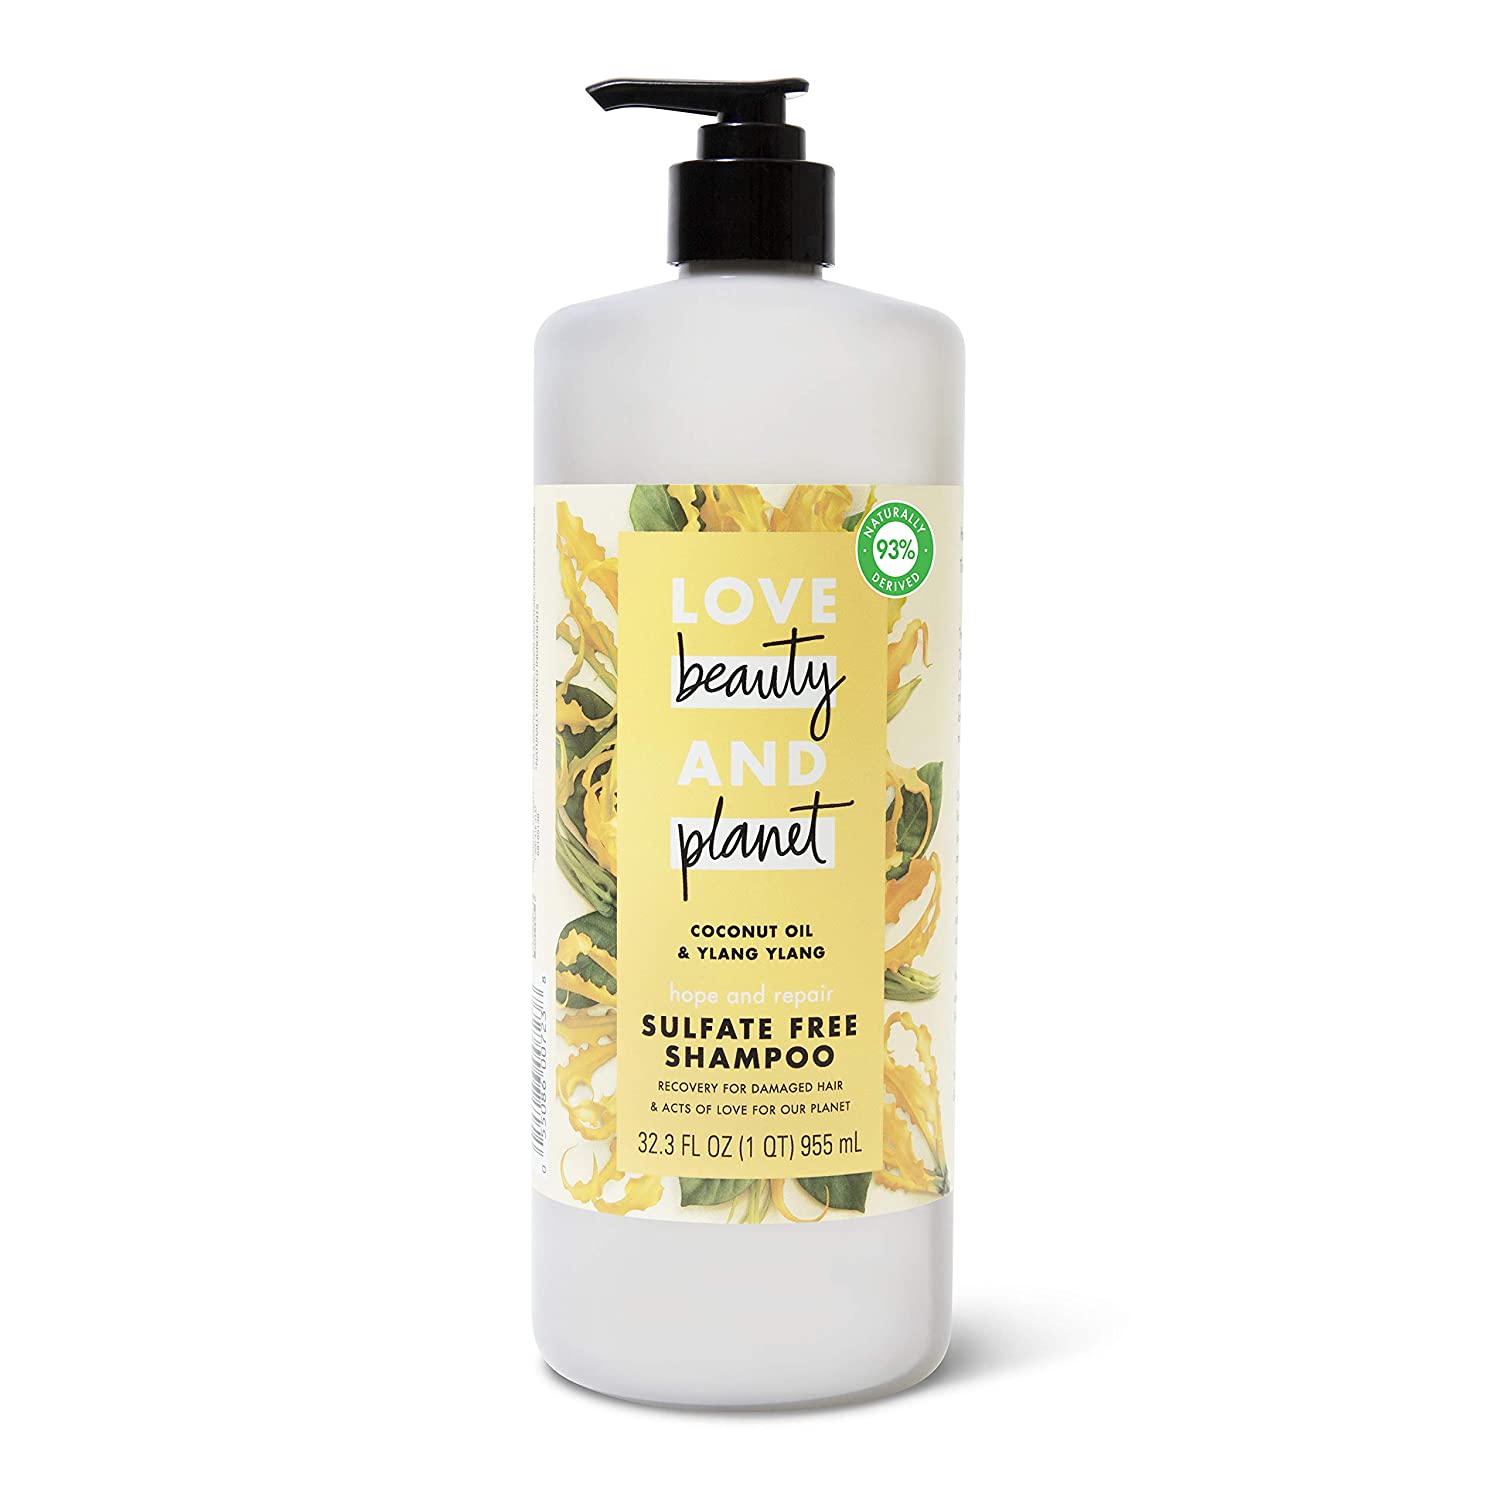 Love Beauty And Planet Hope and Repair Shampoo